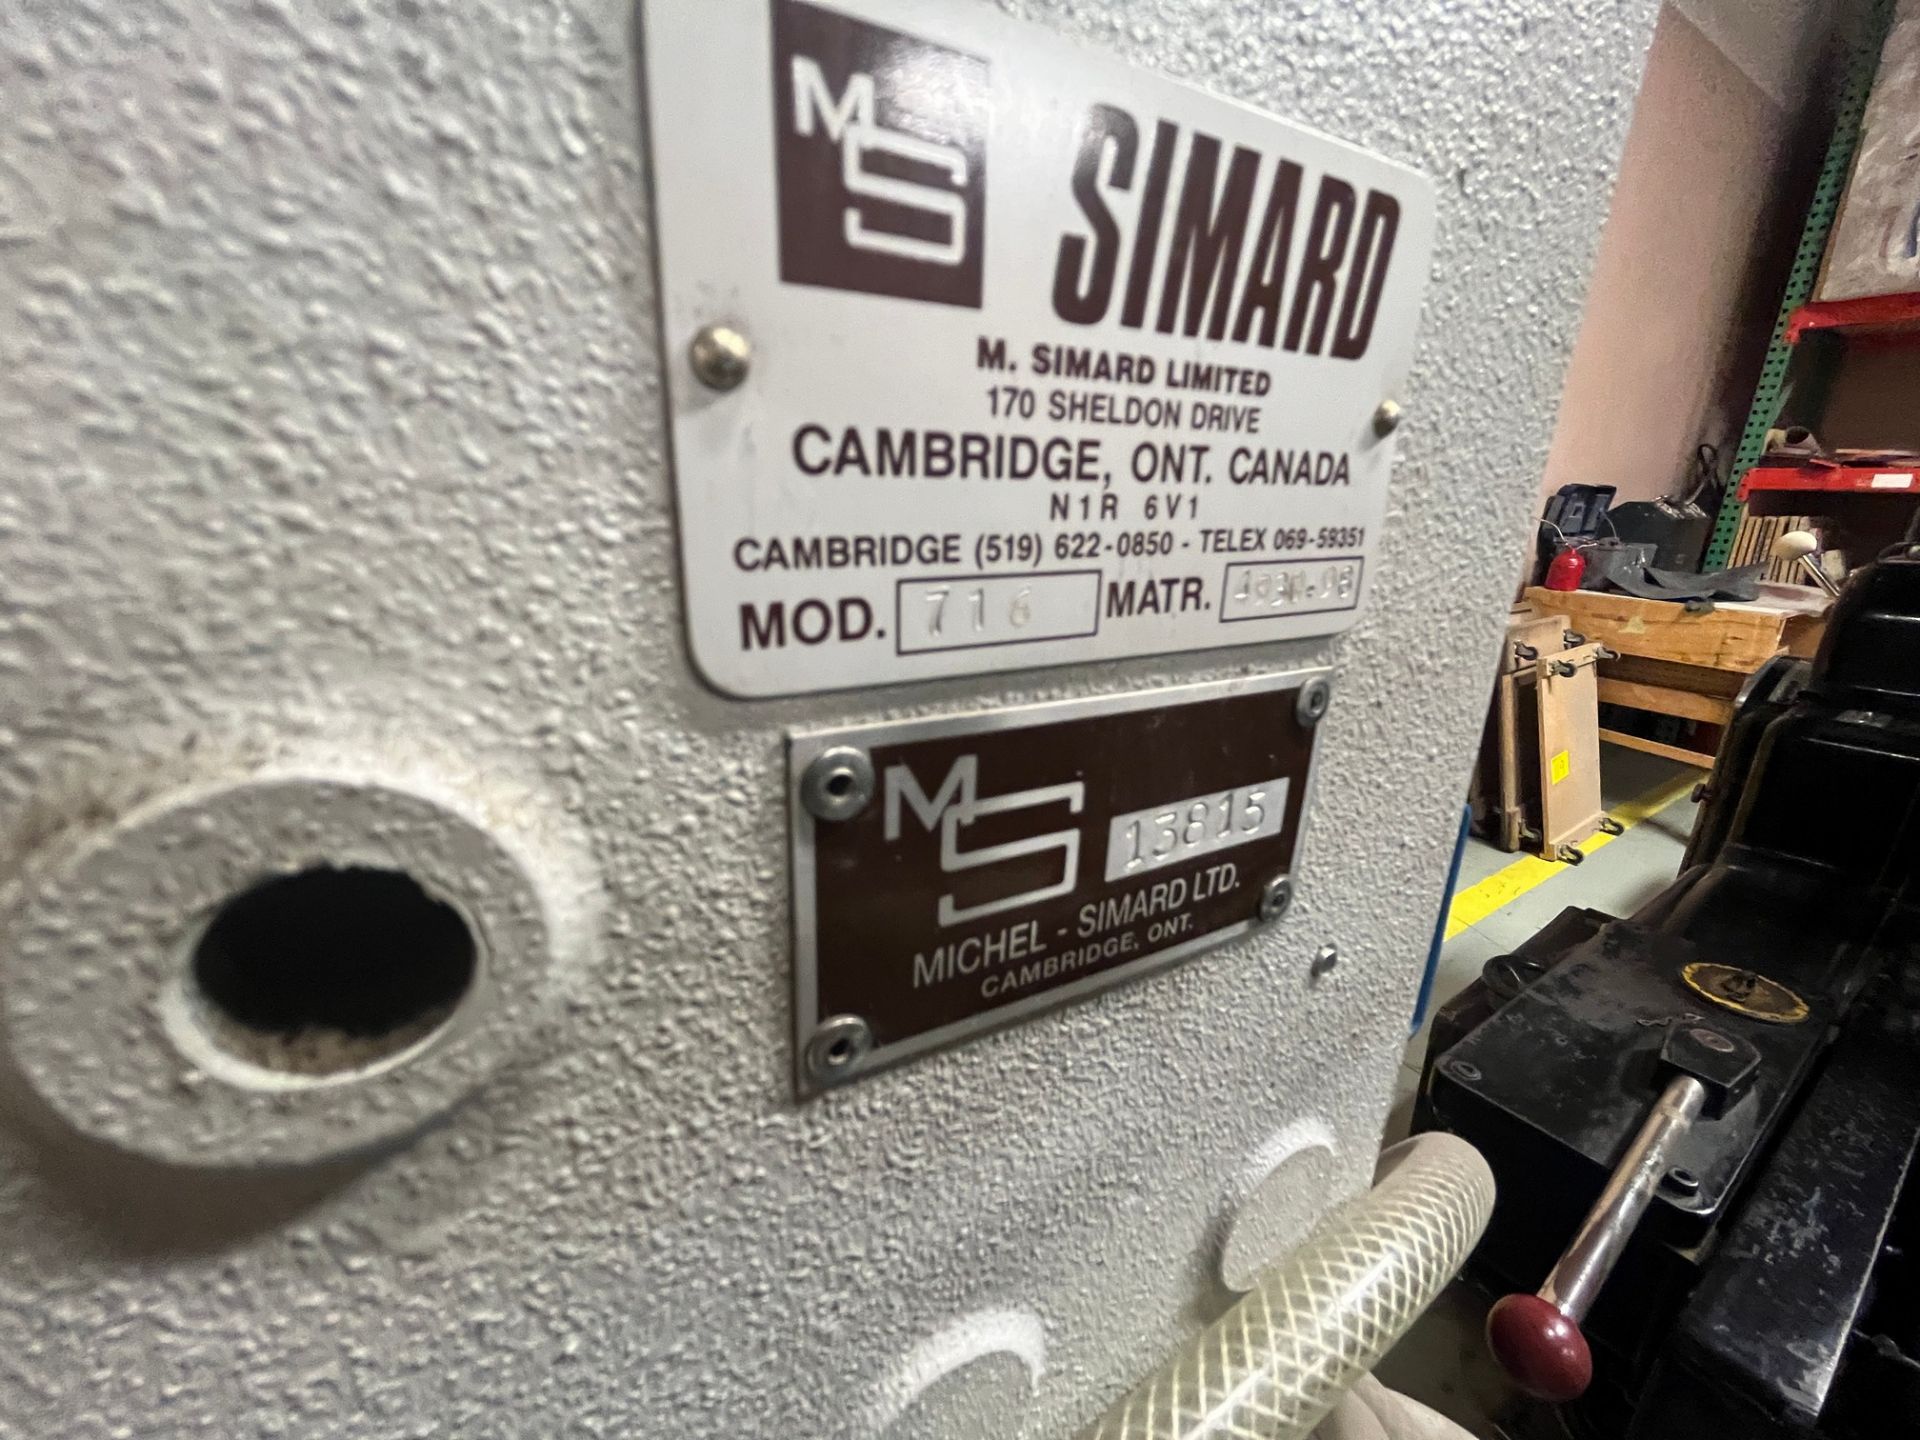 SIMARD MODEL 716 PNEUMATIC PUNCH, S/N 13815 W/ FOOT PEDAL - Image 2 of 4